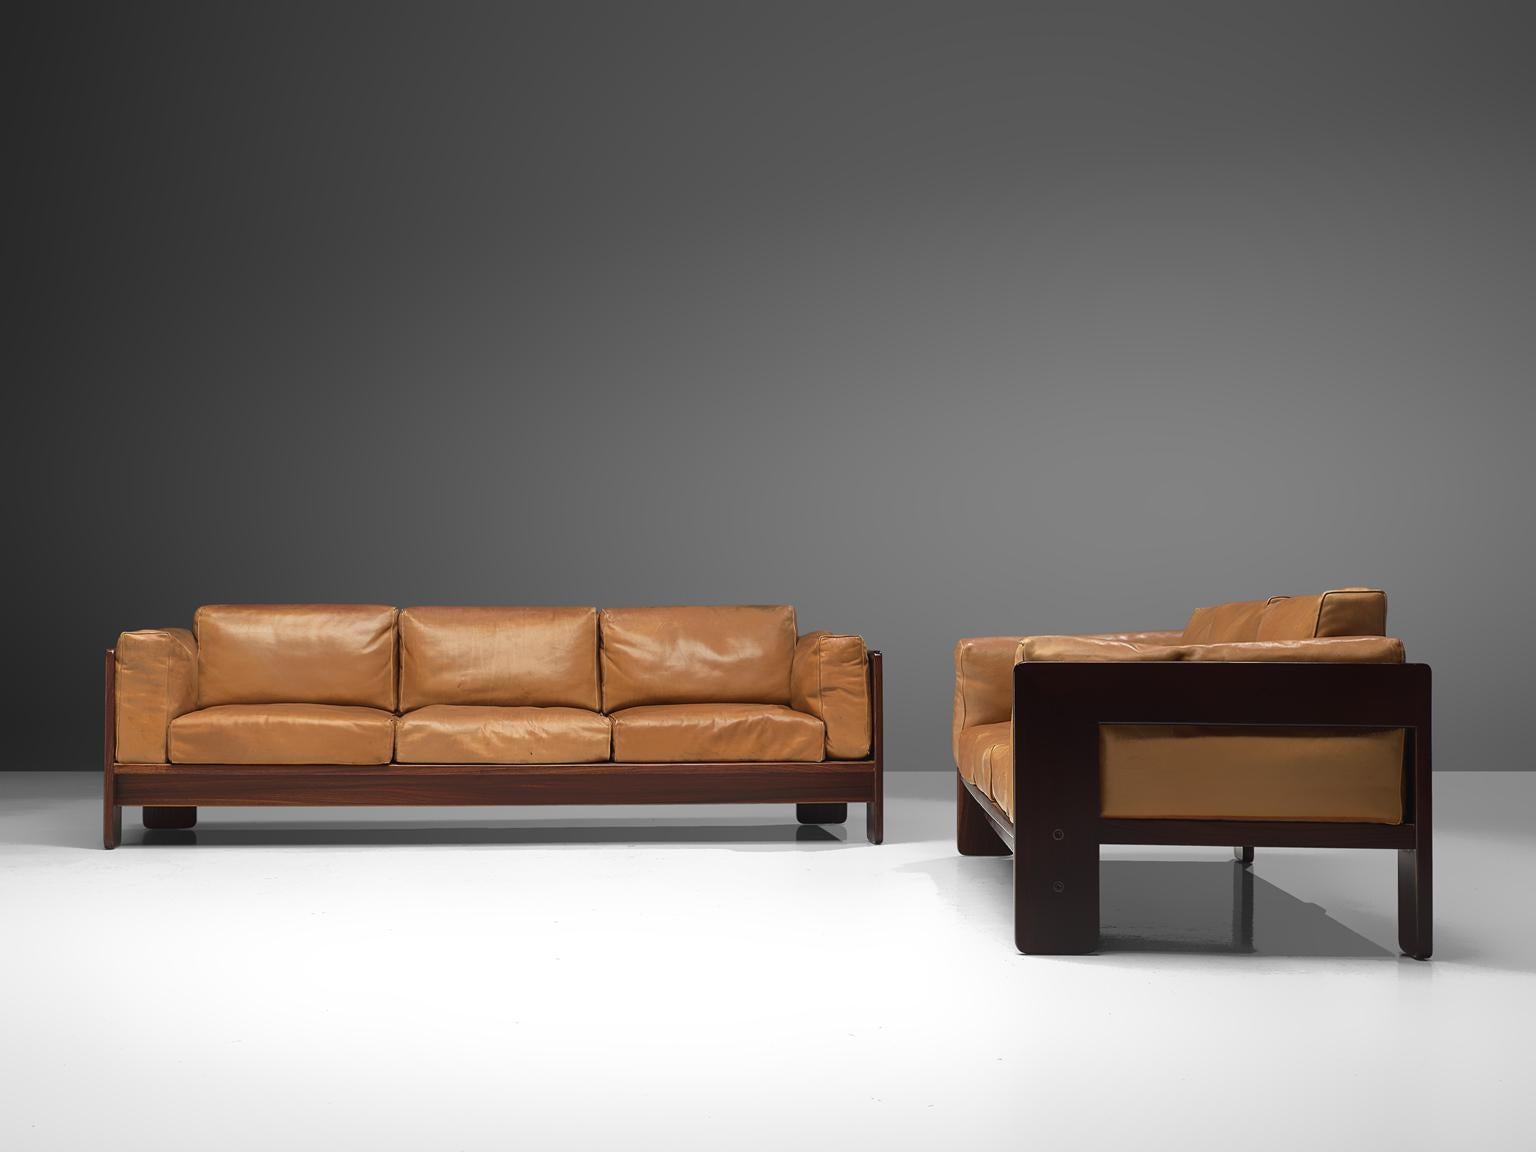 Tobia Scarpa for Knoll, pair of 'Bastiano' sofas, leather and rosewood, Italy, design 1960, manufactured between 1969-1970s.

Beautiful pair of Bastiano sofas made with a rosewood frame and cognac leather cushions. Tobia Scarpa designed the